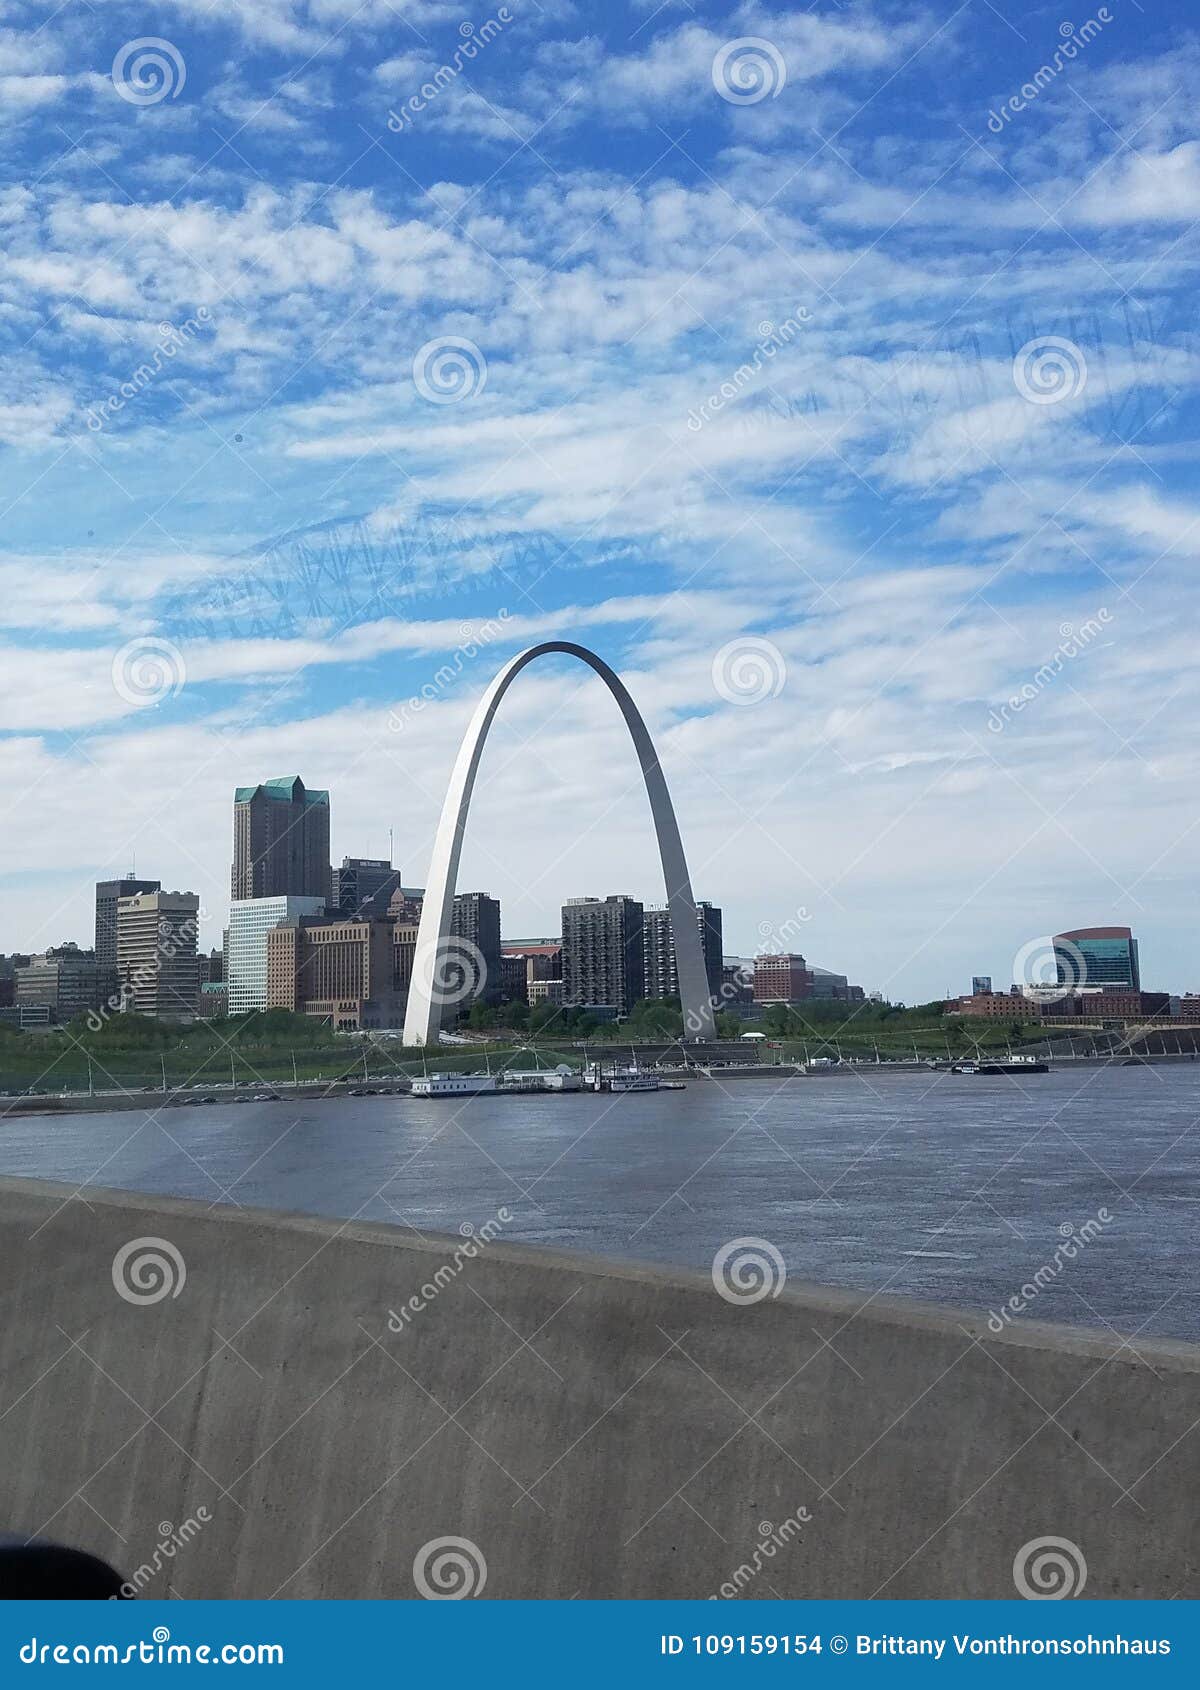 St Louis Arch Images - Download 2,201 Royalty Free Photos - Page 14